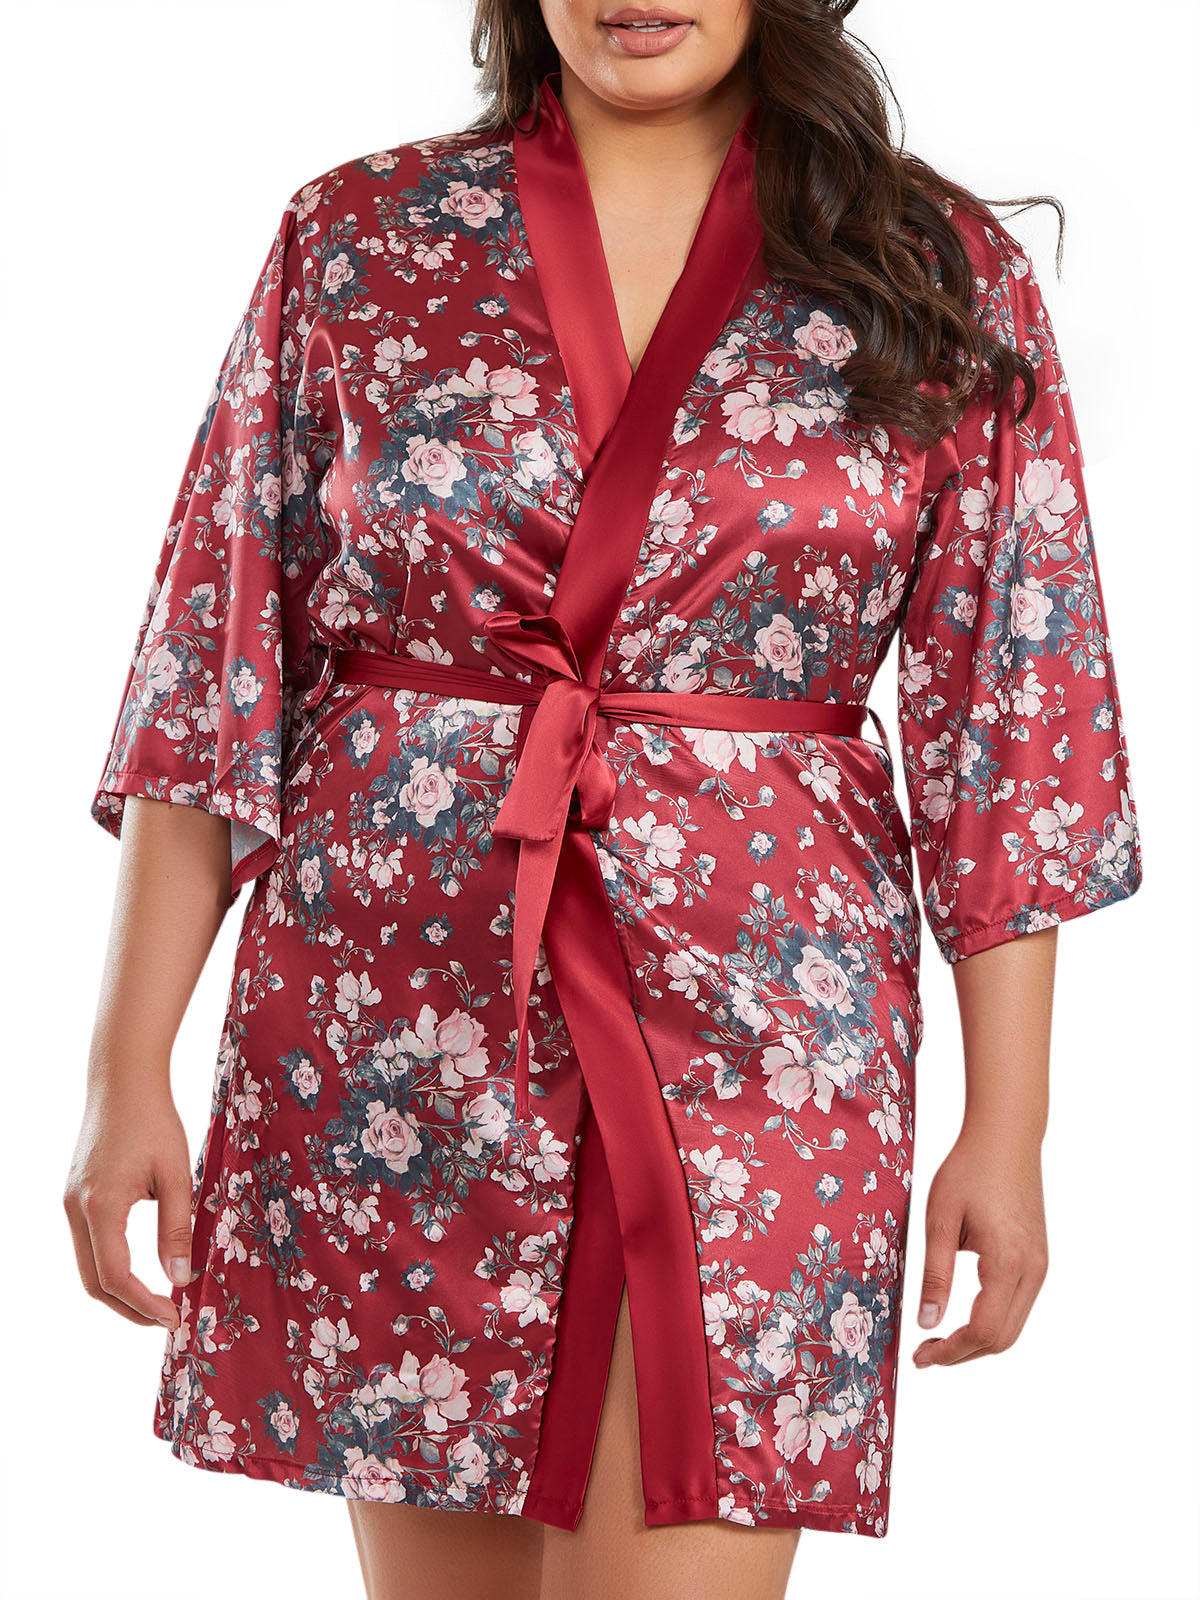 iCollection Robe Brittany Plus Size Robe